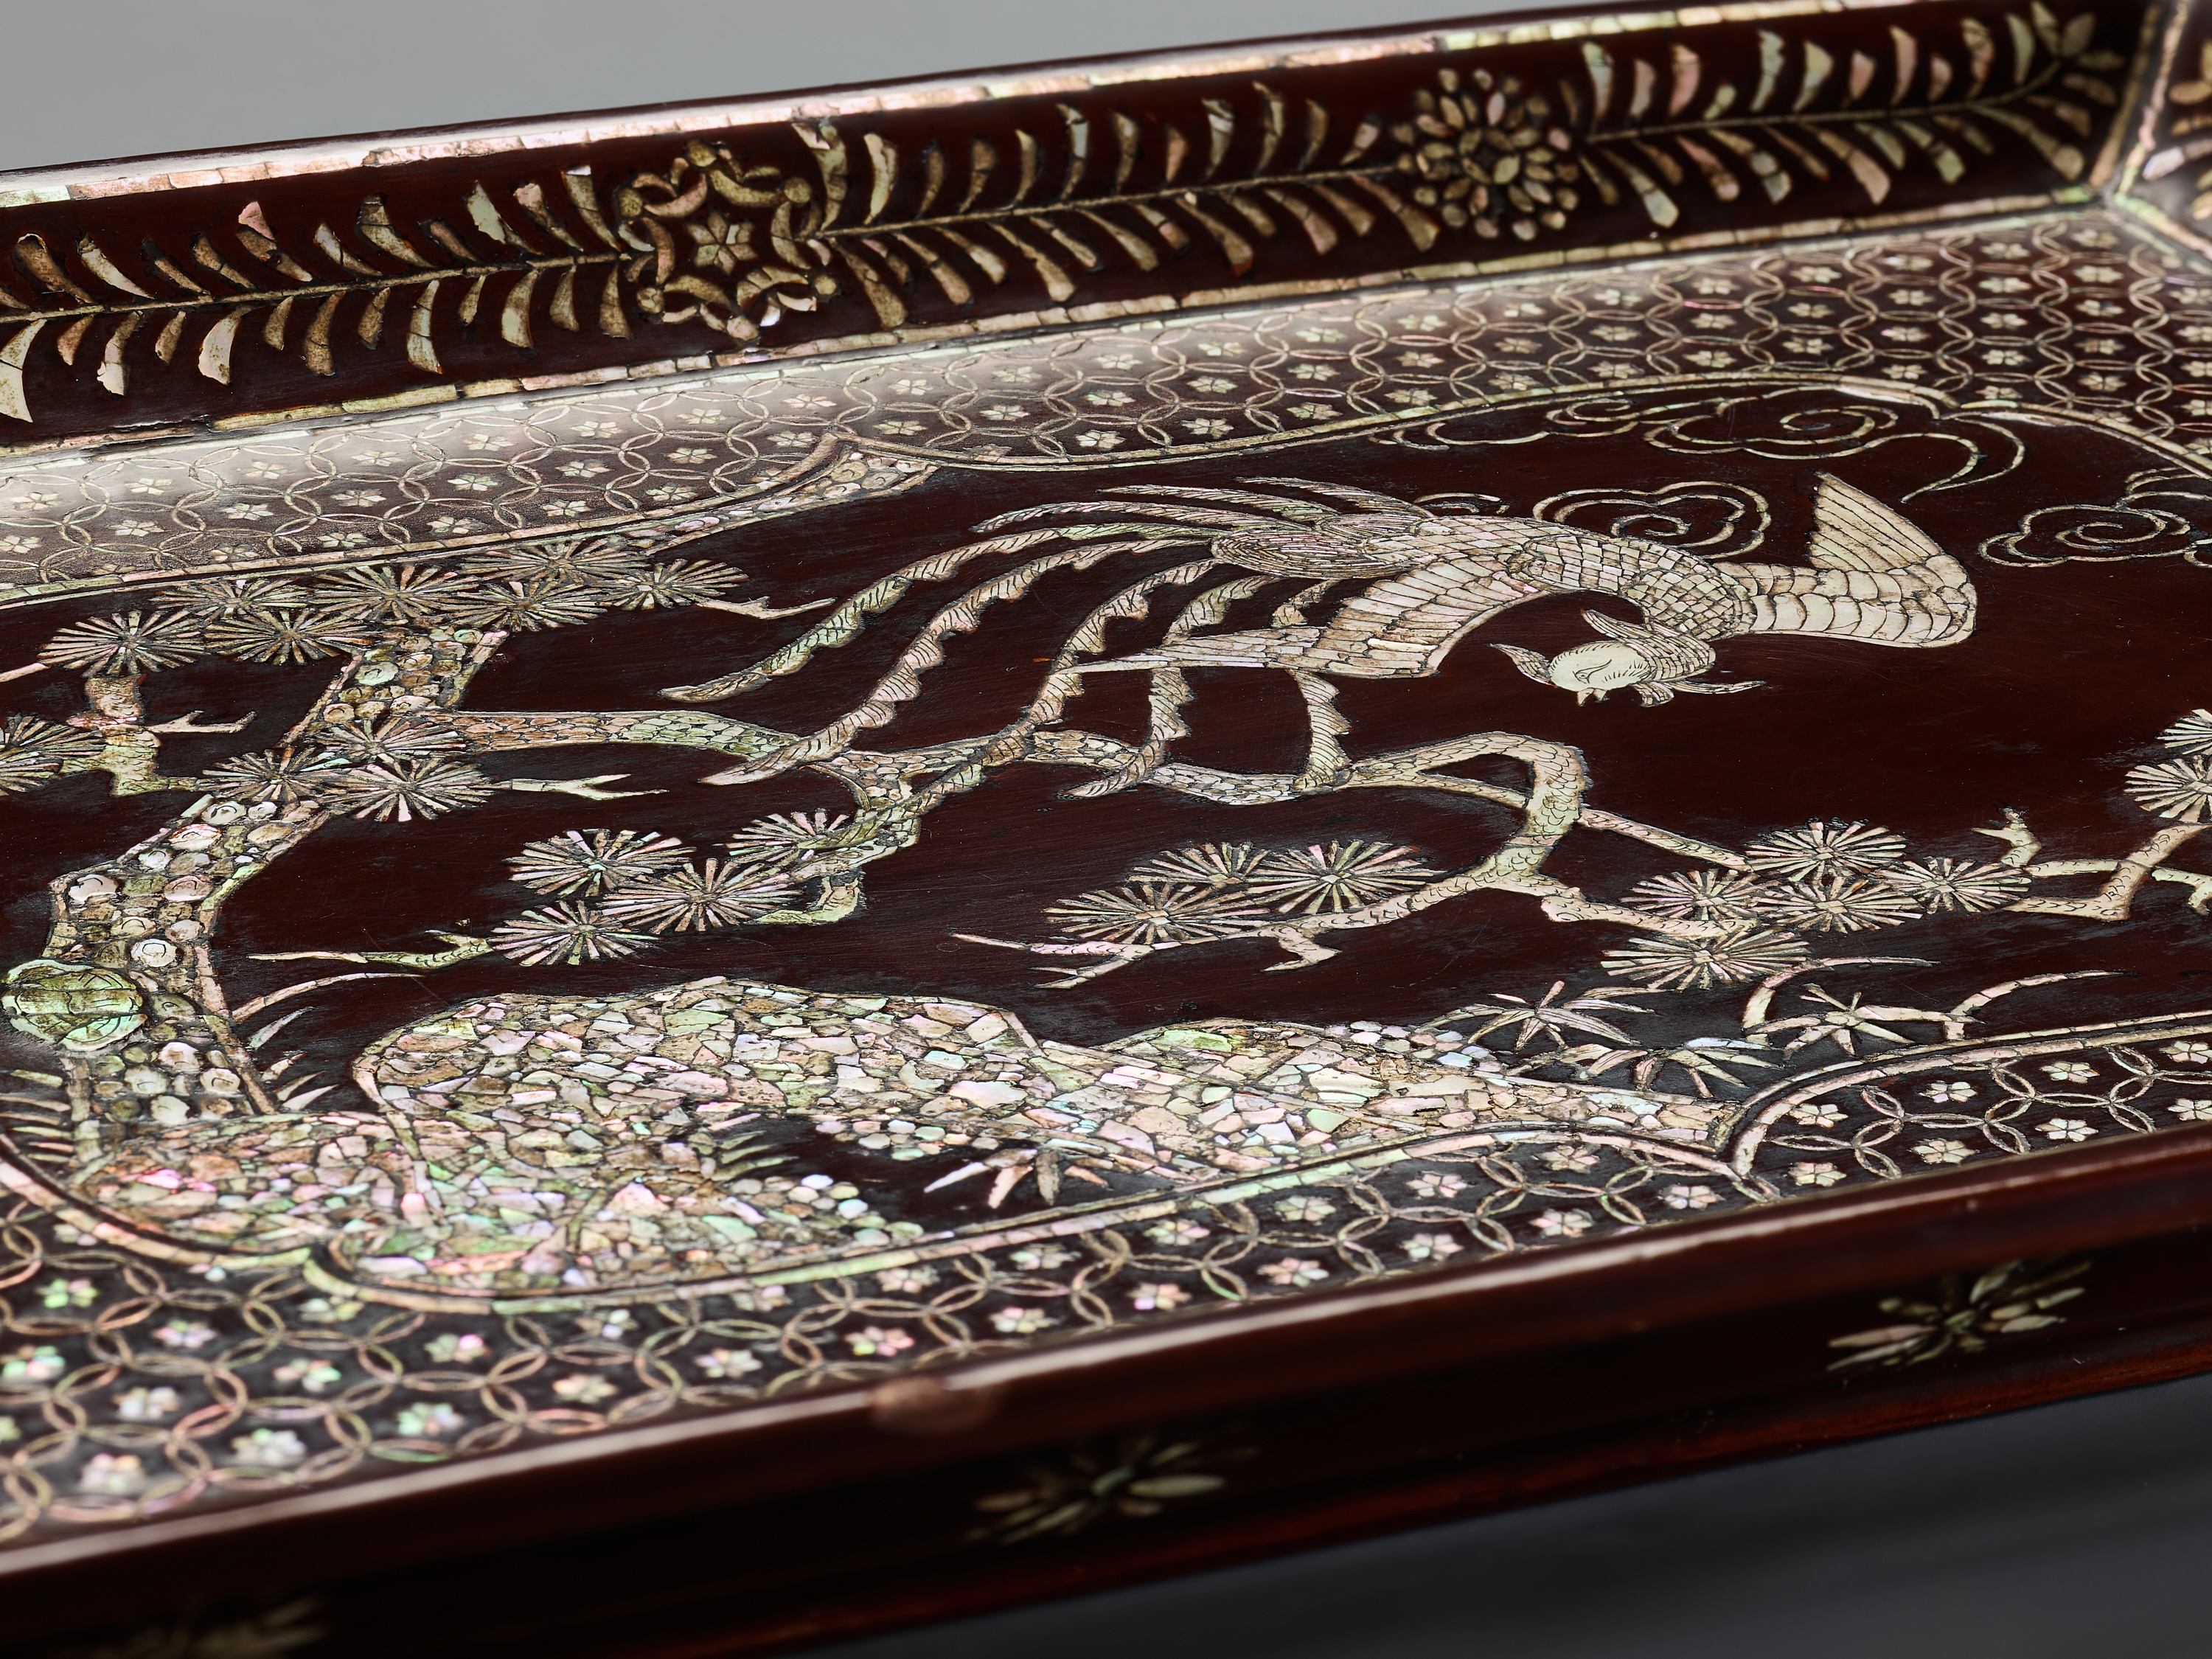 A RARE INLAID LACQUER 'PHOENIX' TRAY, MING DYNASTY - Image 5 of 8